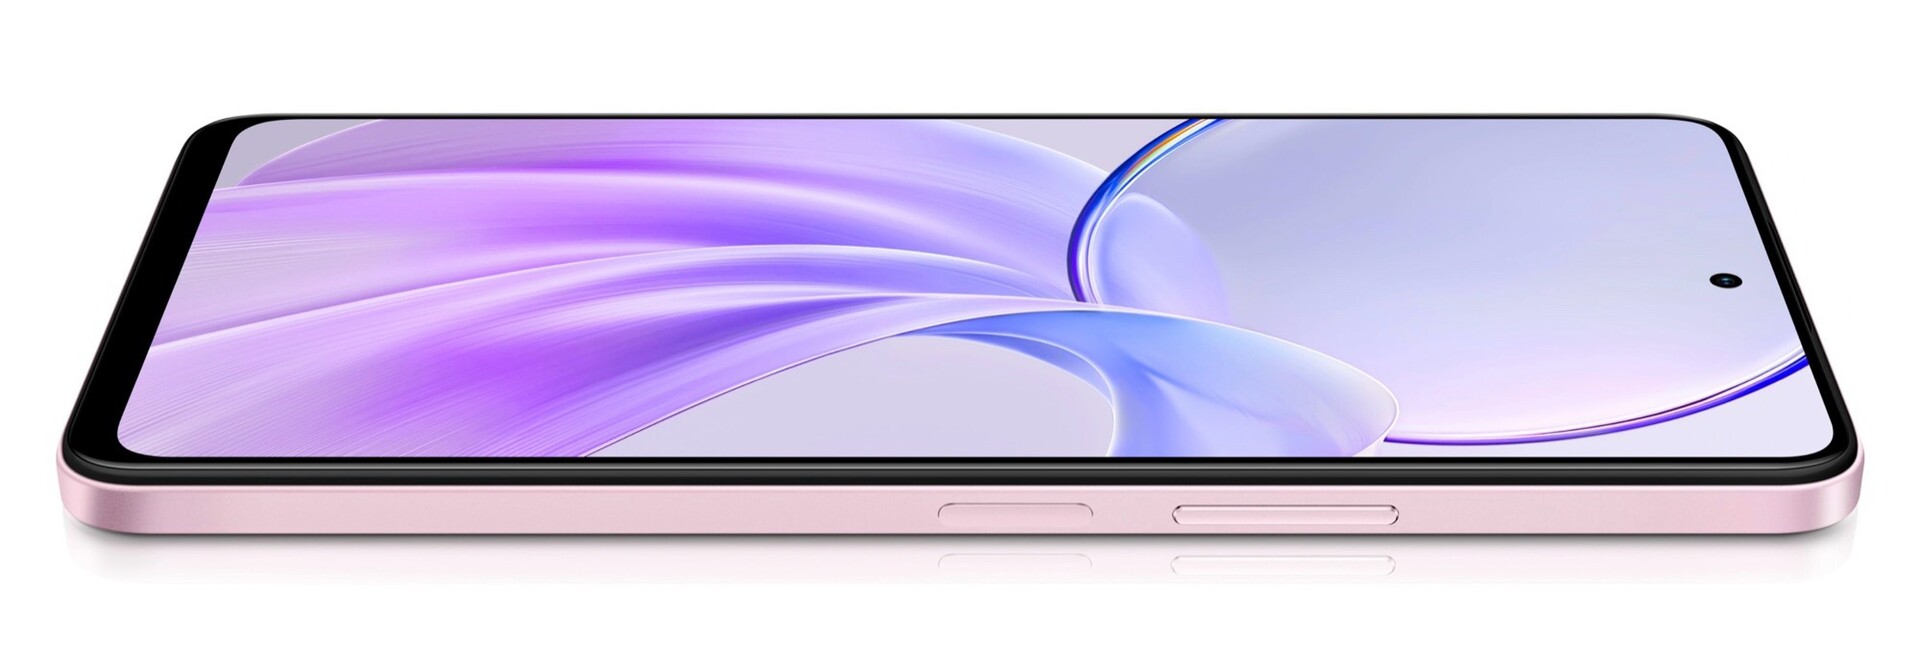 Vivo Y100i launches as a mid-range smartphone with 512 GB memory and 50 MP  dual camera - NotebookCheck.net News